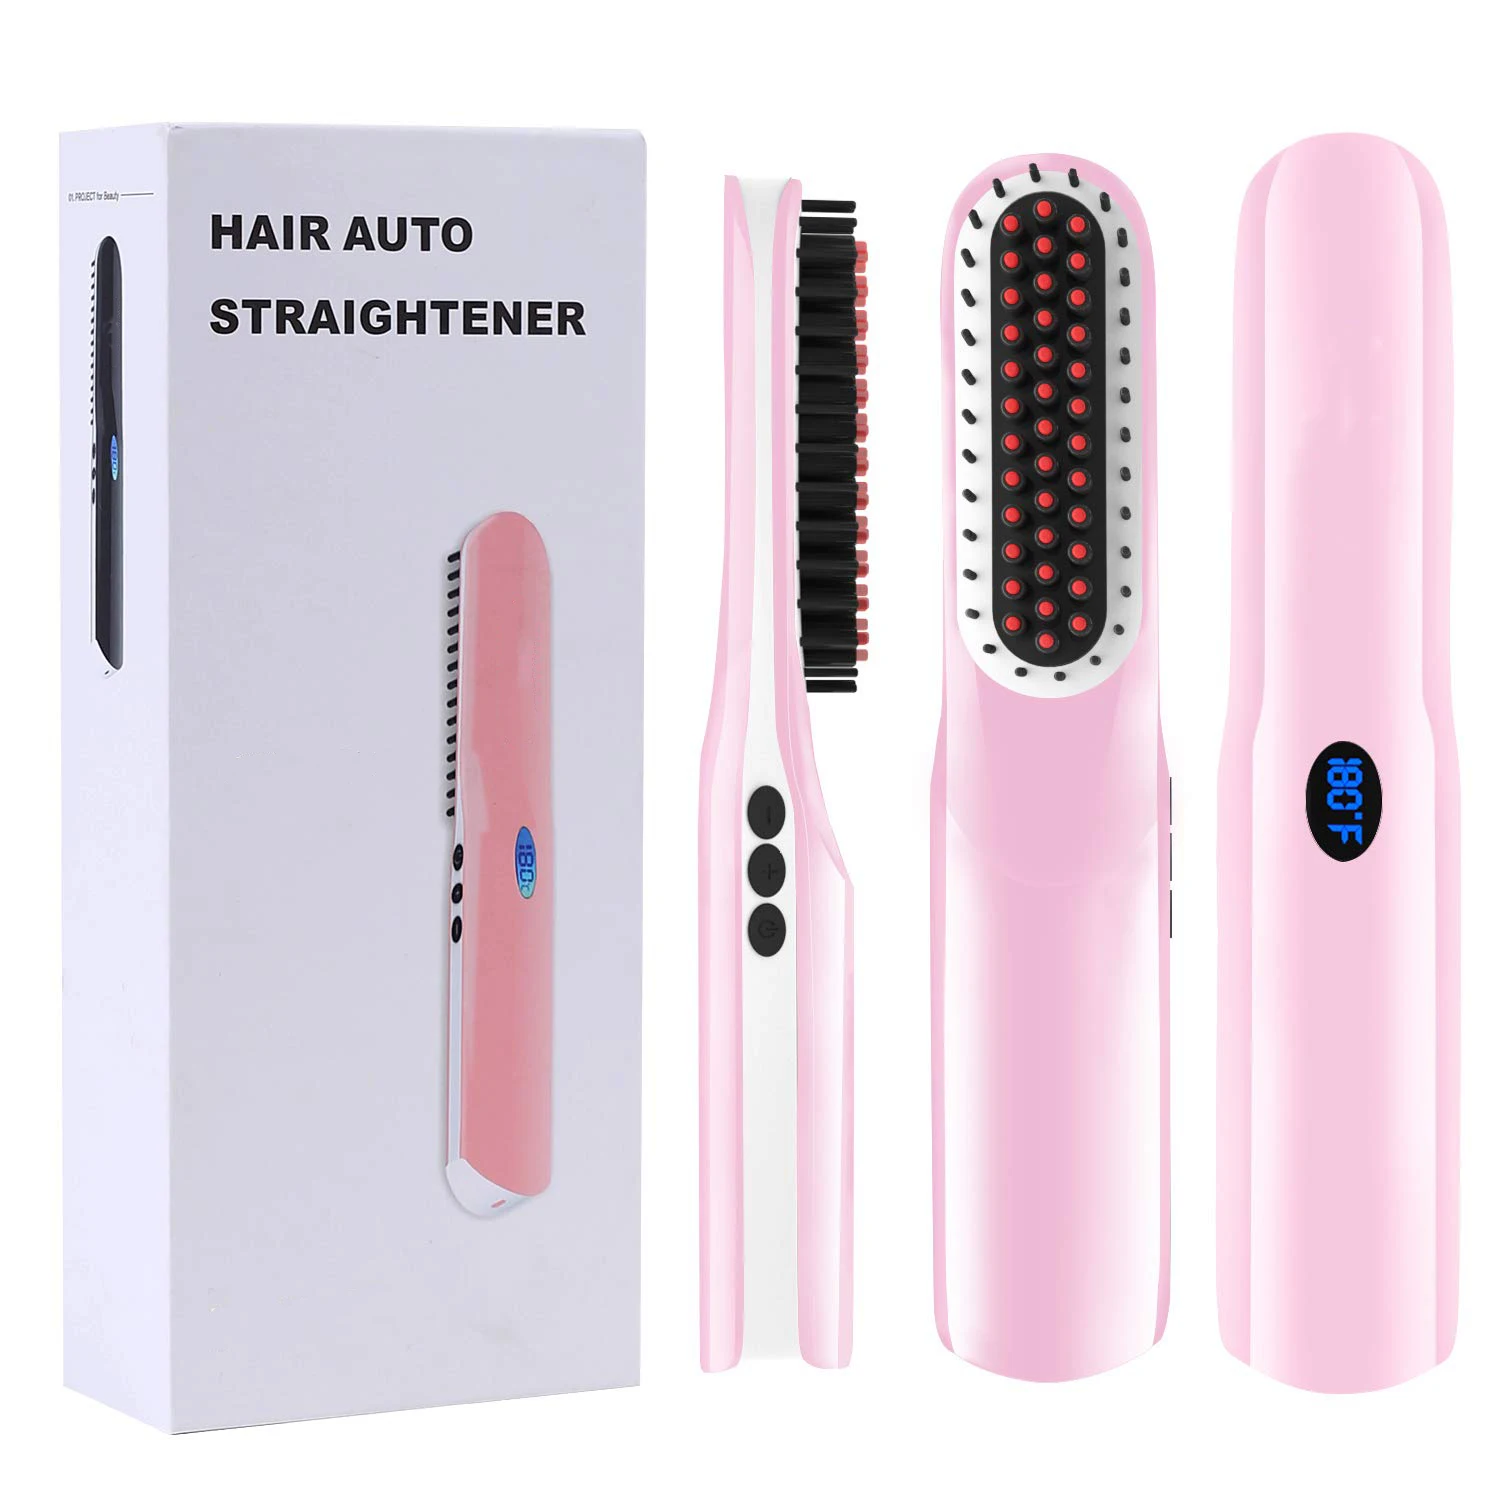 

Portable USB Rechargeable LCD Display Anti Scald Electric Heated Beard & Hair Ionic Straightener Brush for Men & Women - Pink, White/pink/red